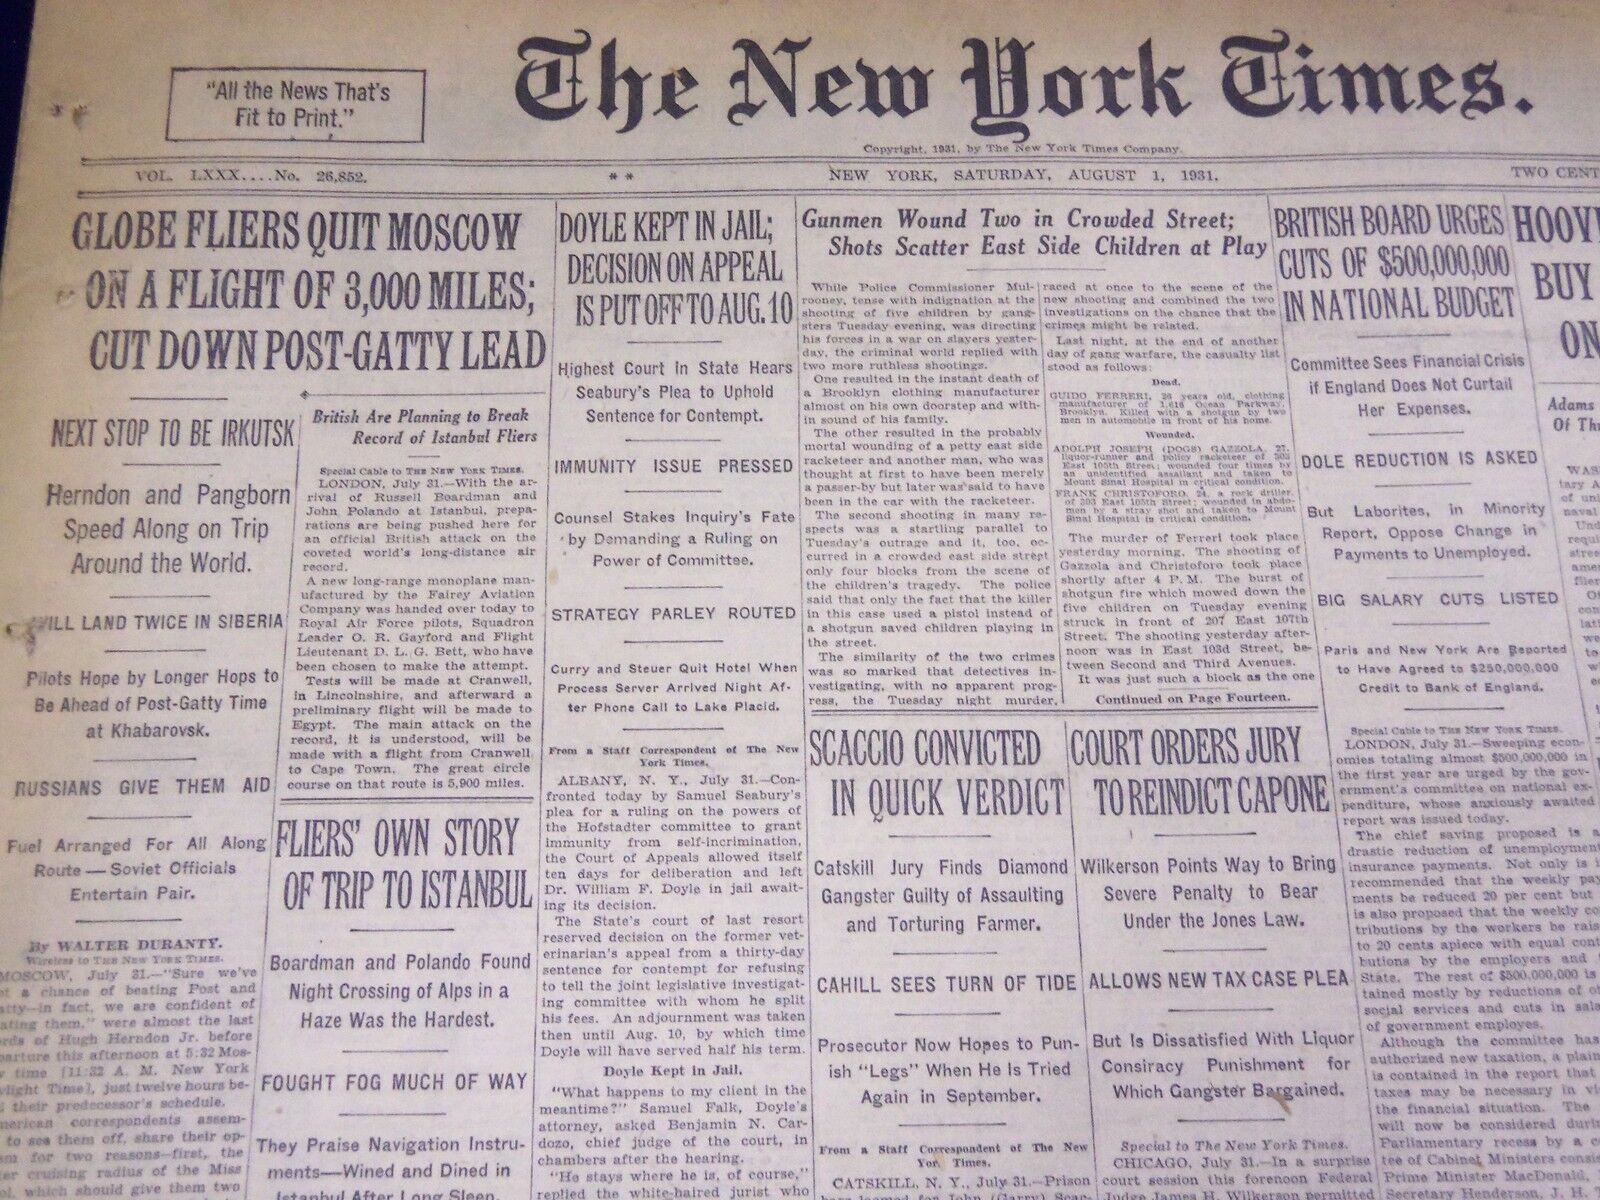 1931 AUGUST 1 NEW YORK TIMES - GLOBE FLIERS QUIT MOSCOW - NT 3931